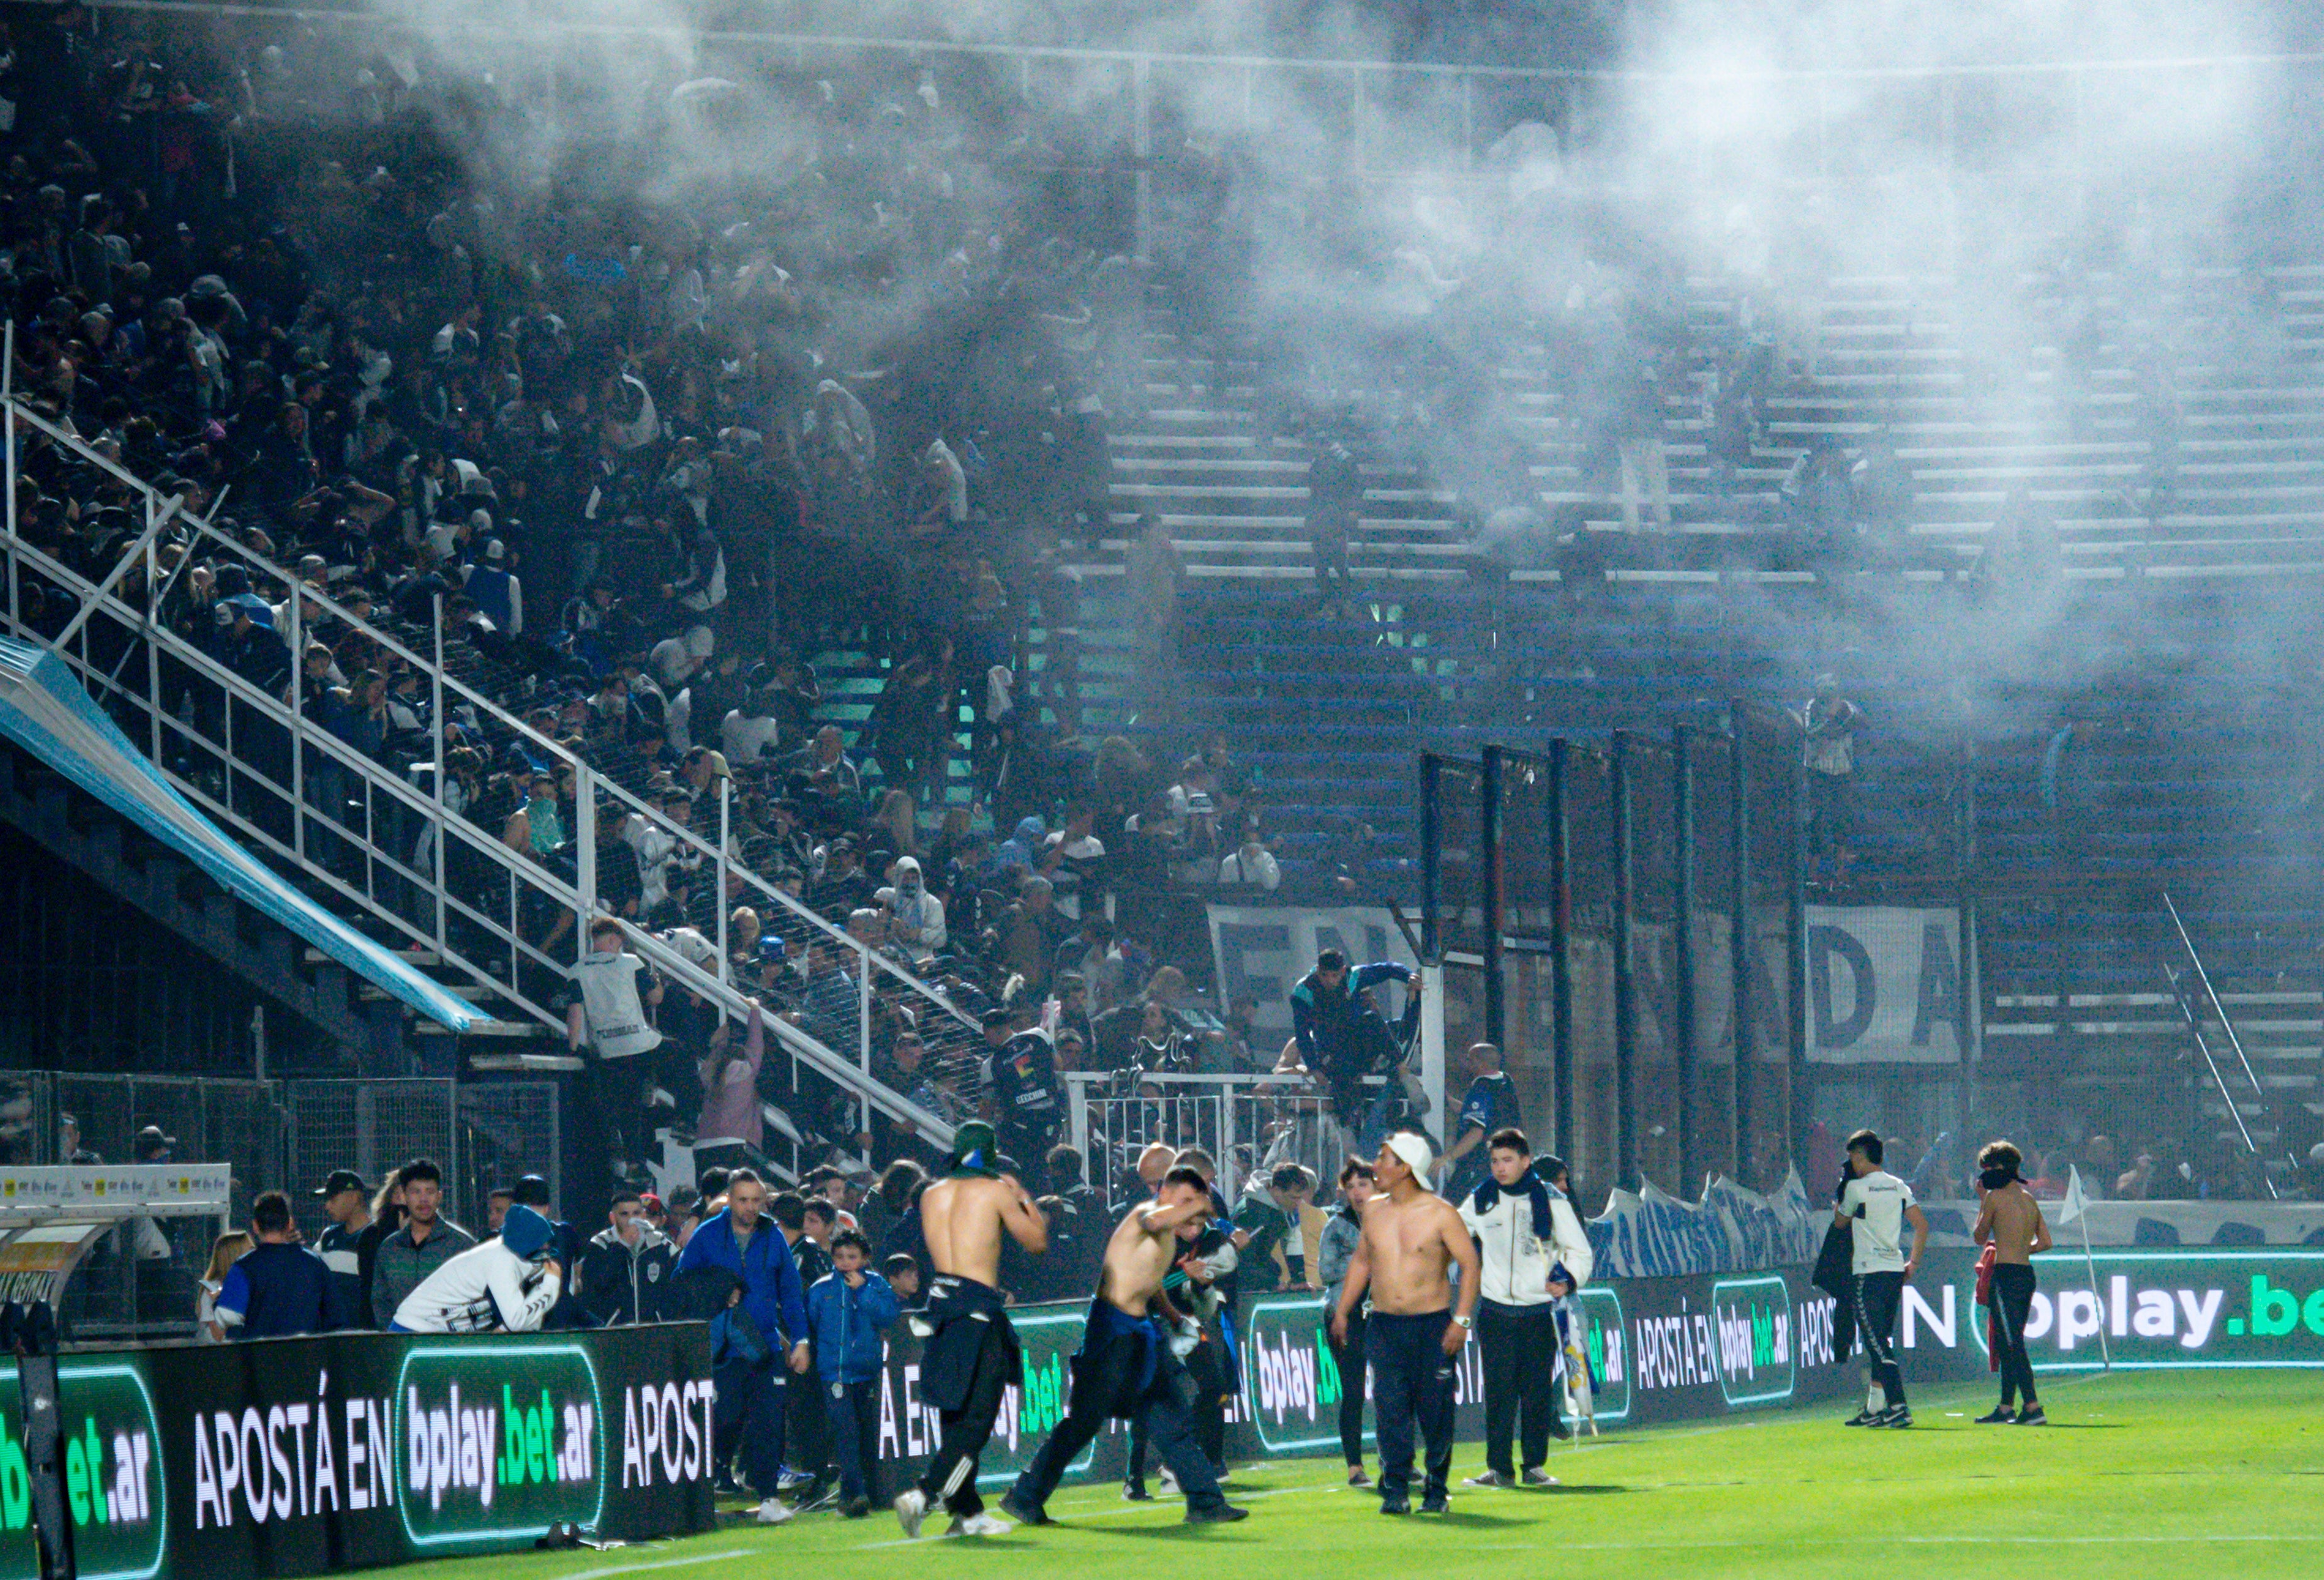 Fans at the Juan Carmelo Zerillo Stadium were forced on to the pitch after tear gas drifted in to the stands